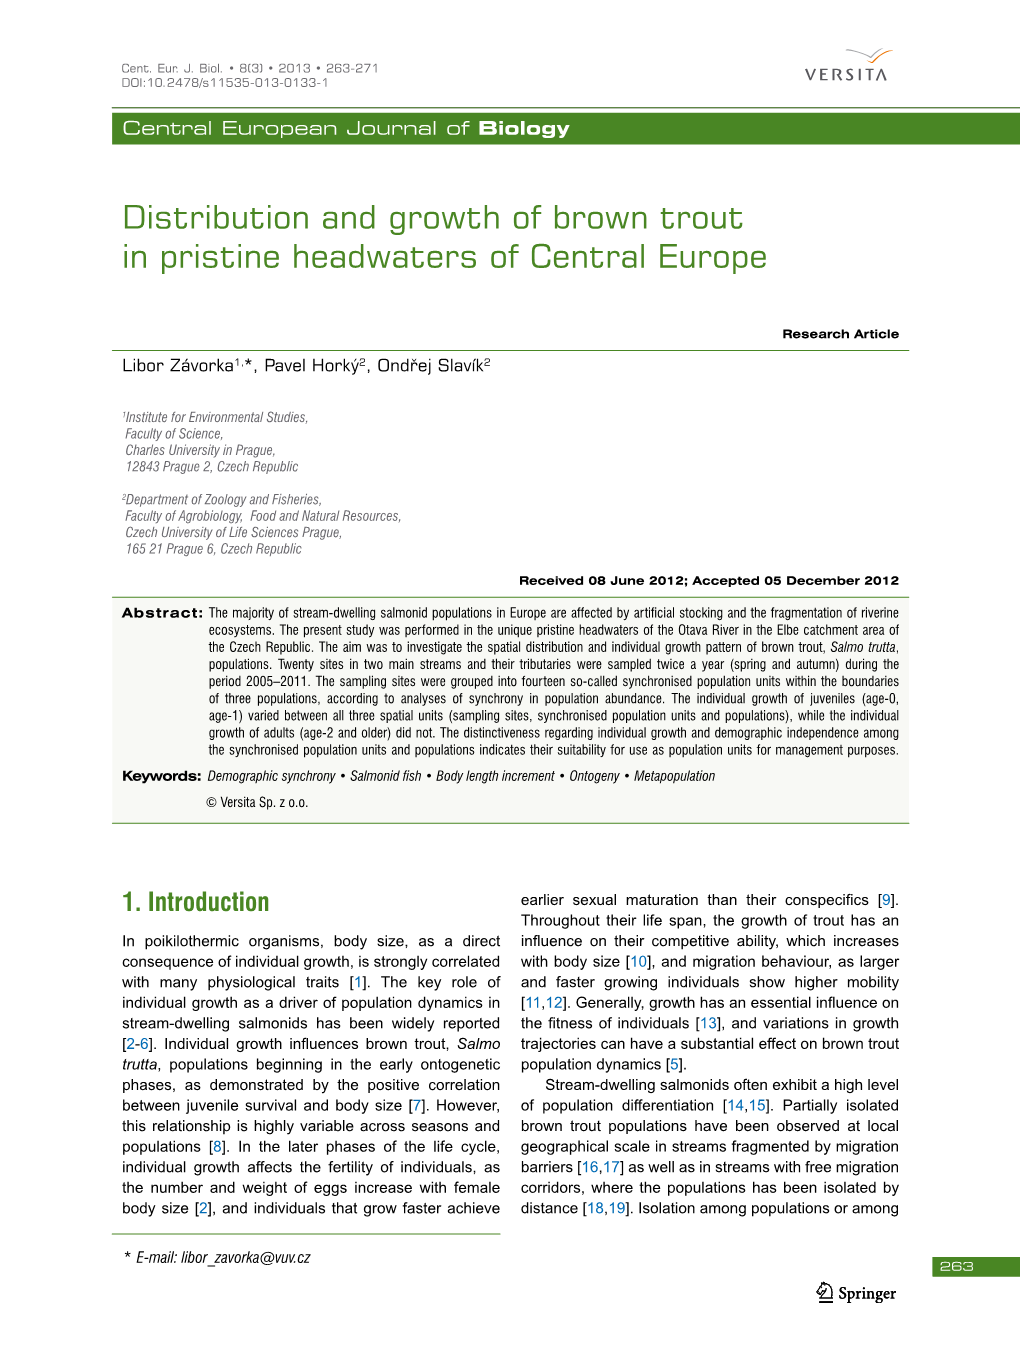 Distribution and Growth of Brown Trout in Pristine Headwaters of Central Europe